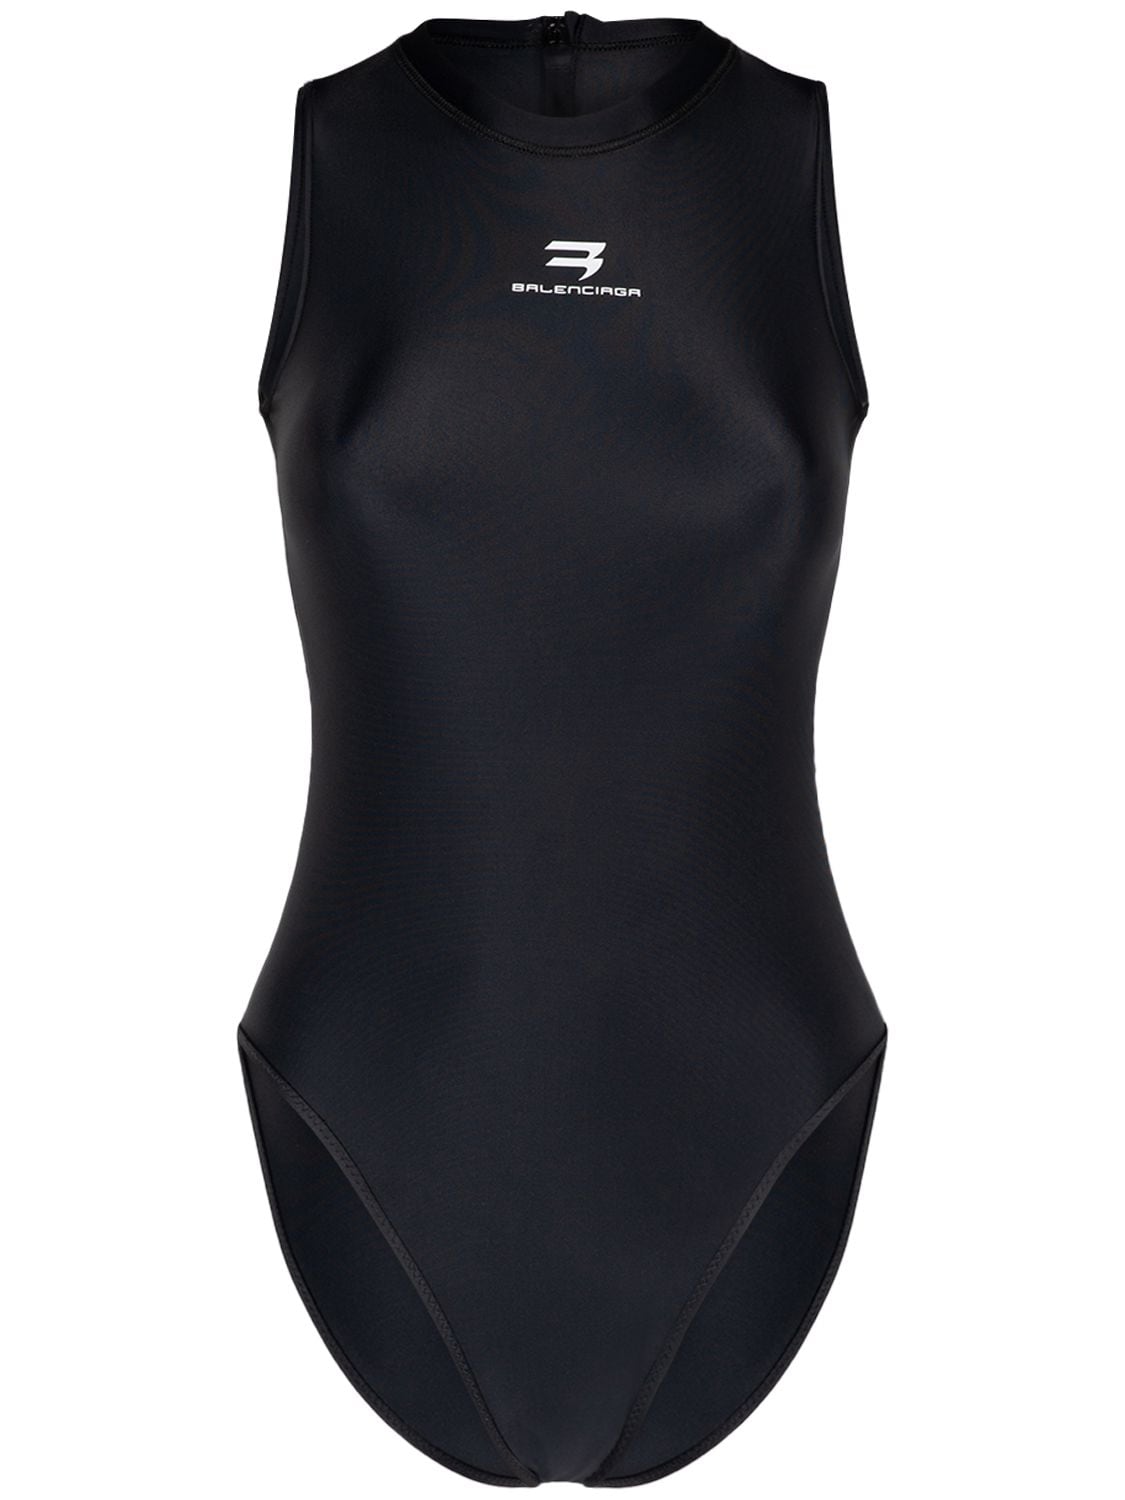 Image of Racing Print Spandex One Piece Swimsuit